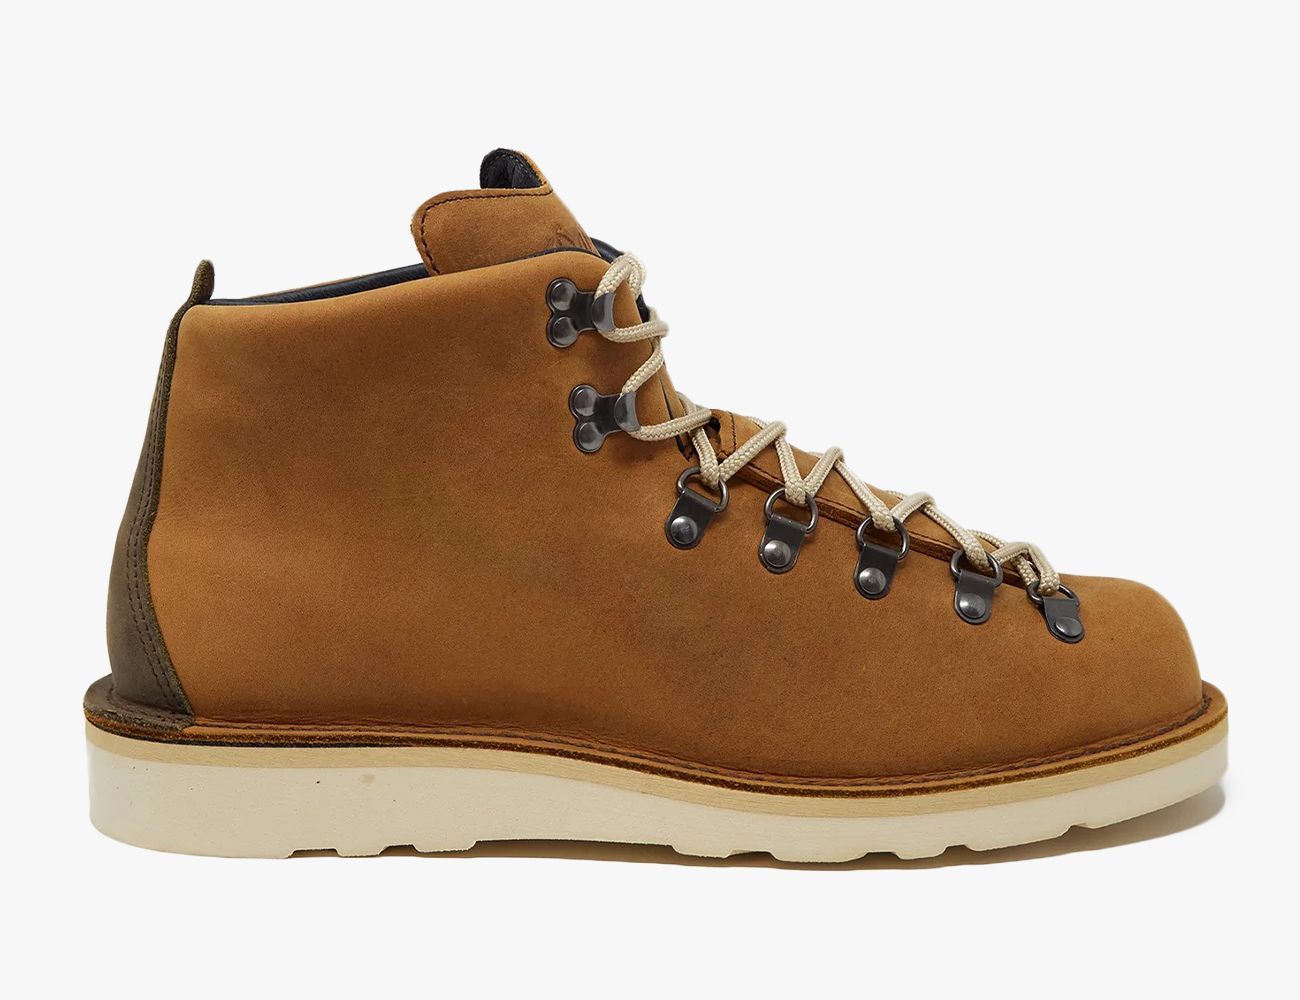 Todd Snyder Drops 2 Limited-Edition Danner Mountain Light Boots